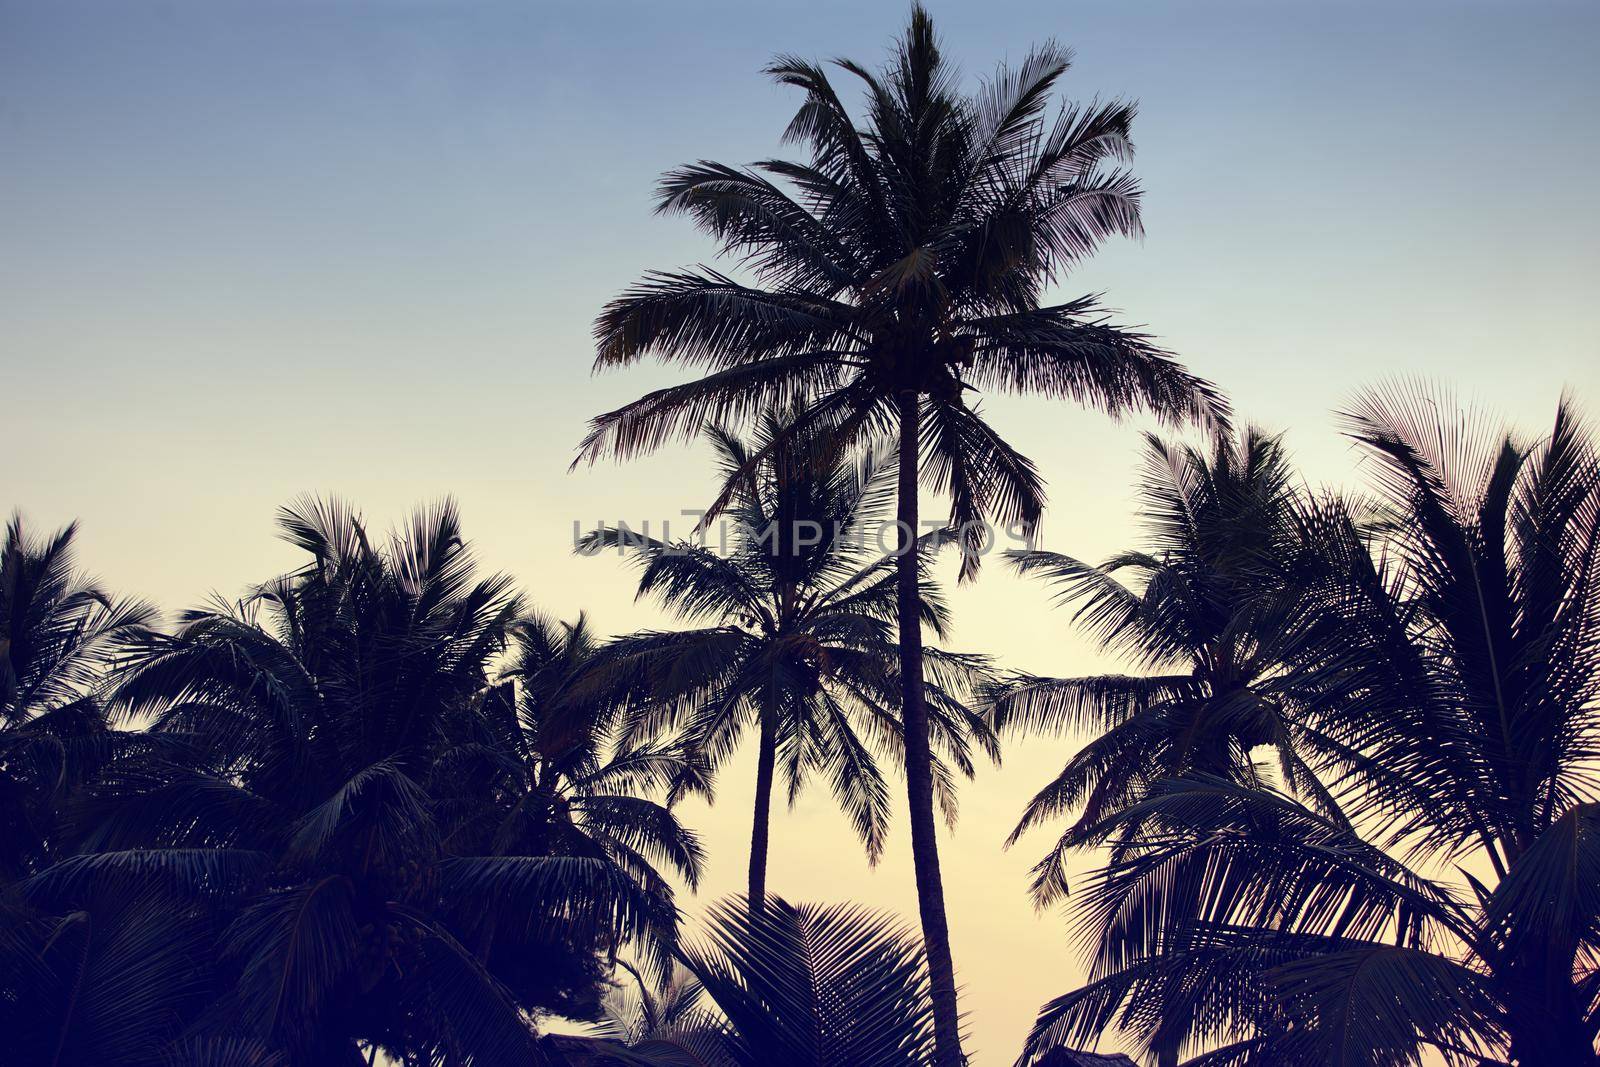 Retro style image of silhouetted palm trees against a dusky sky.